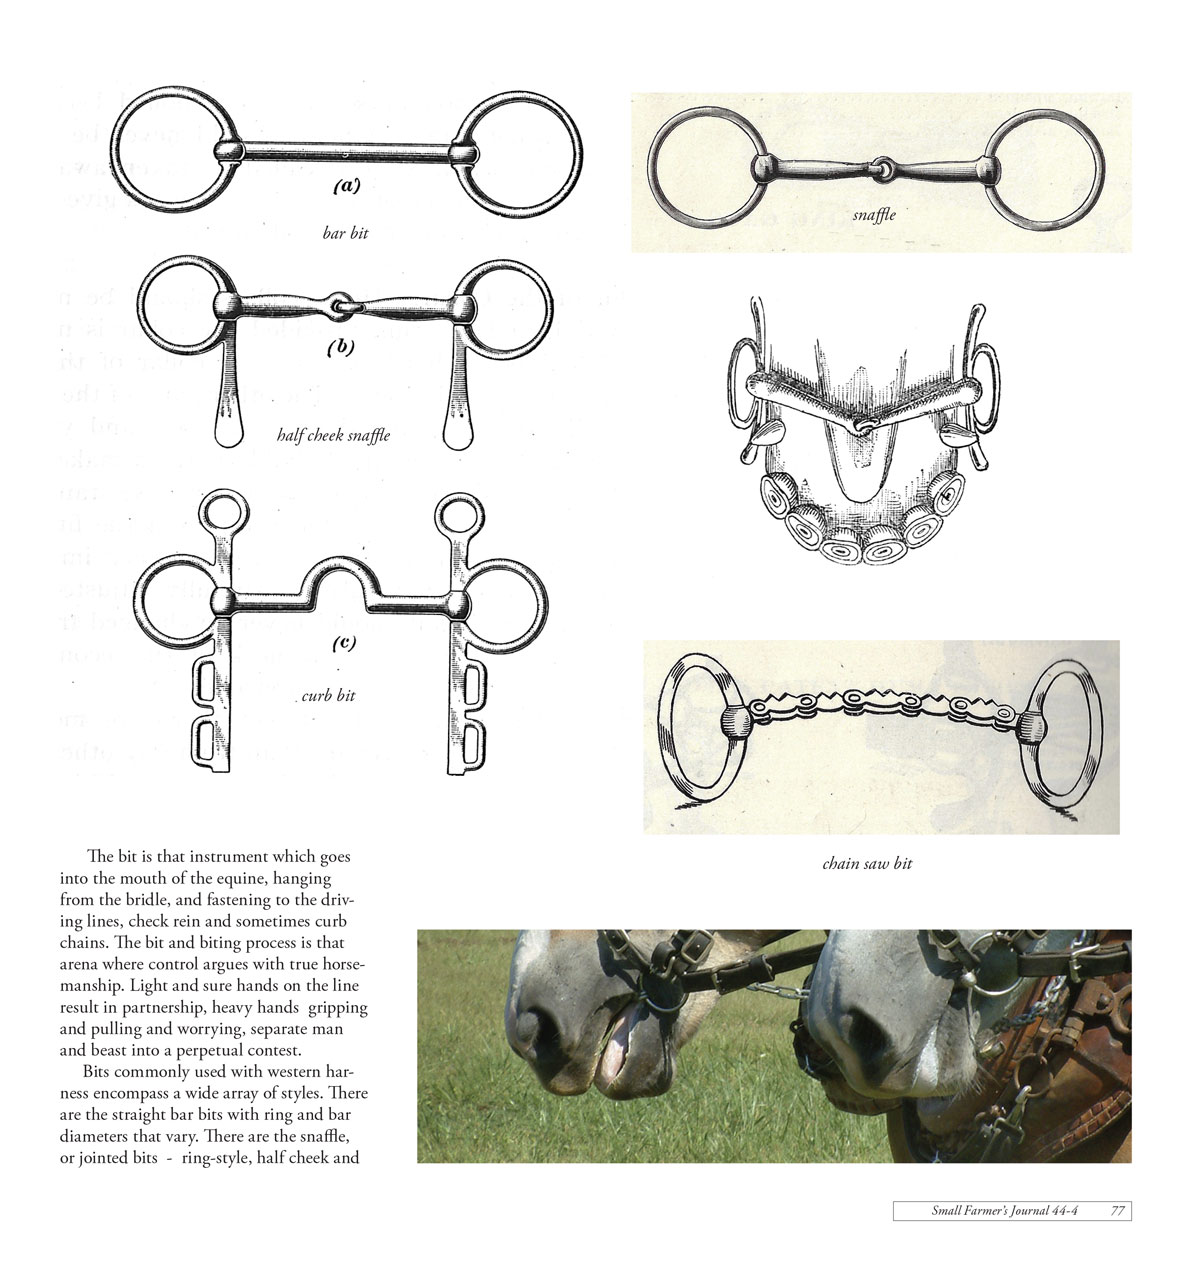 Work Horse and Mule Harness Design and Function Part 2